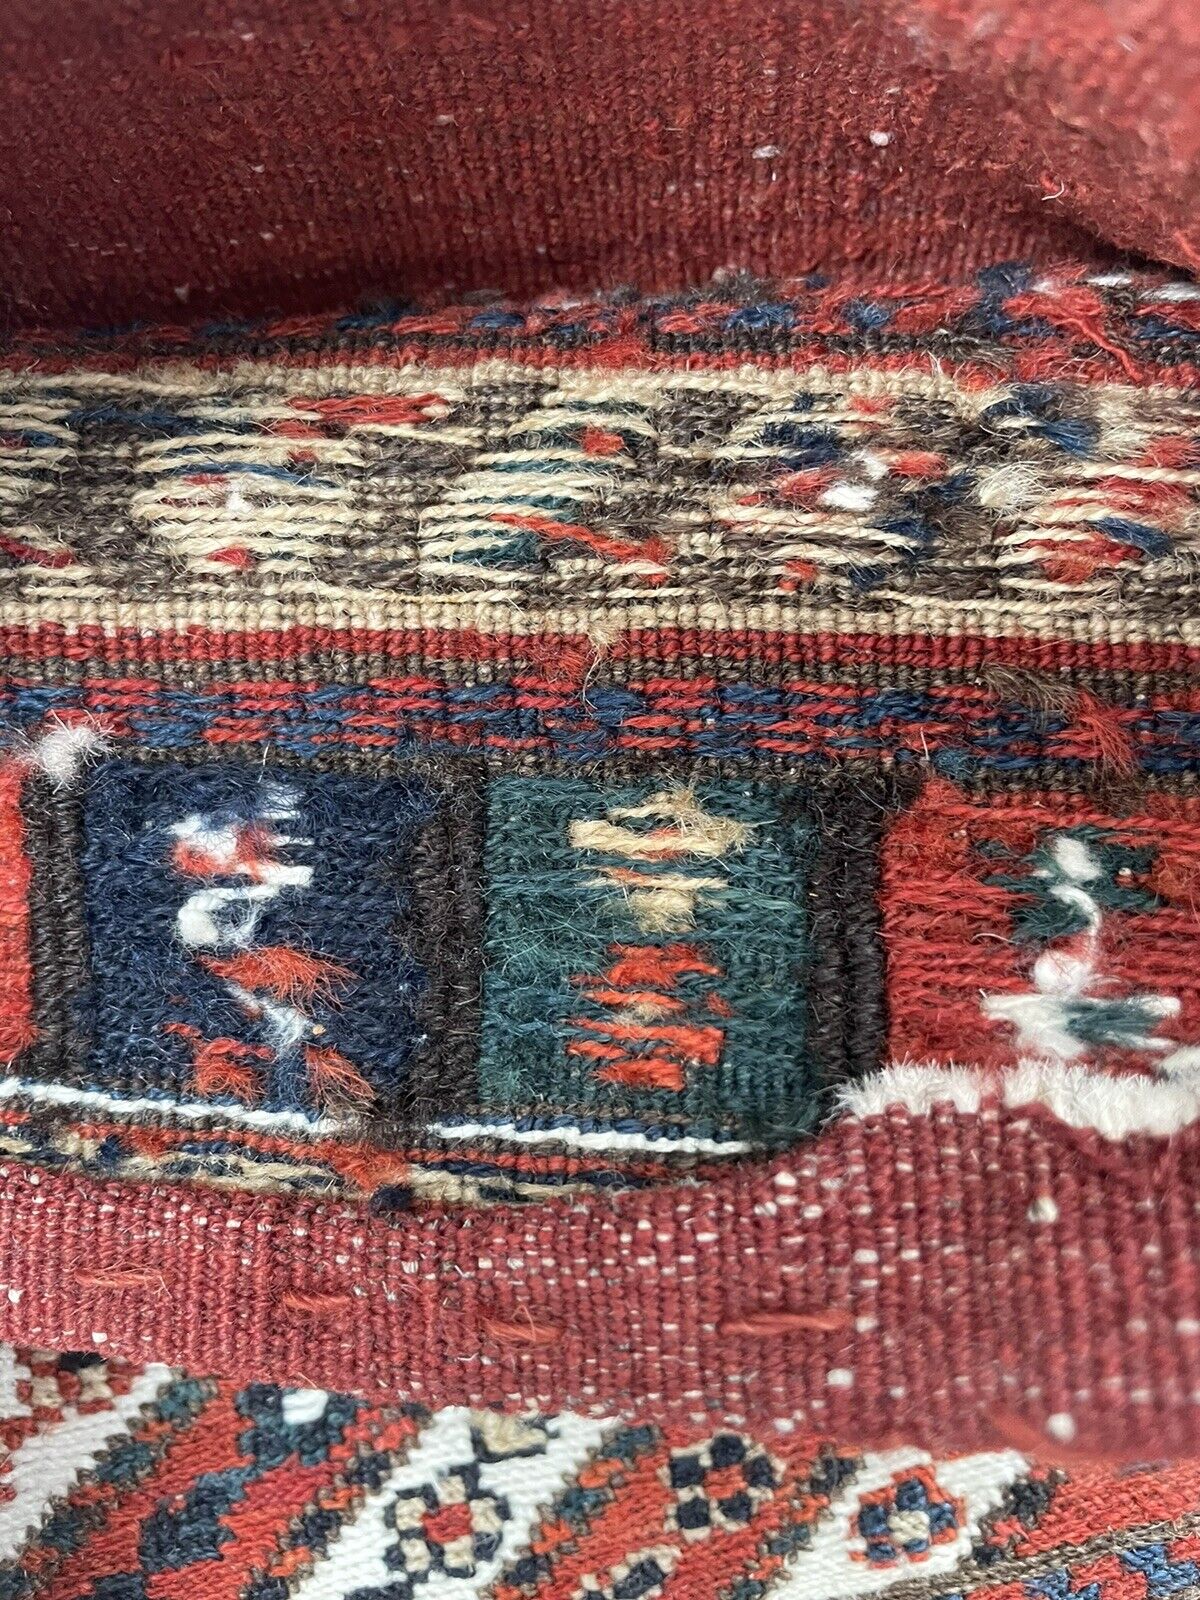 Close-up of intricate diagonal stripes on Handmade Vintage Persian Kurdish Salt Bag - Detailed view showcasing the diagonal stripes filled with geometric motifs at the center of the bag.